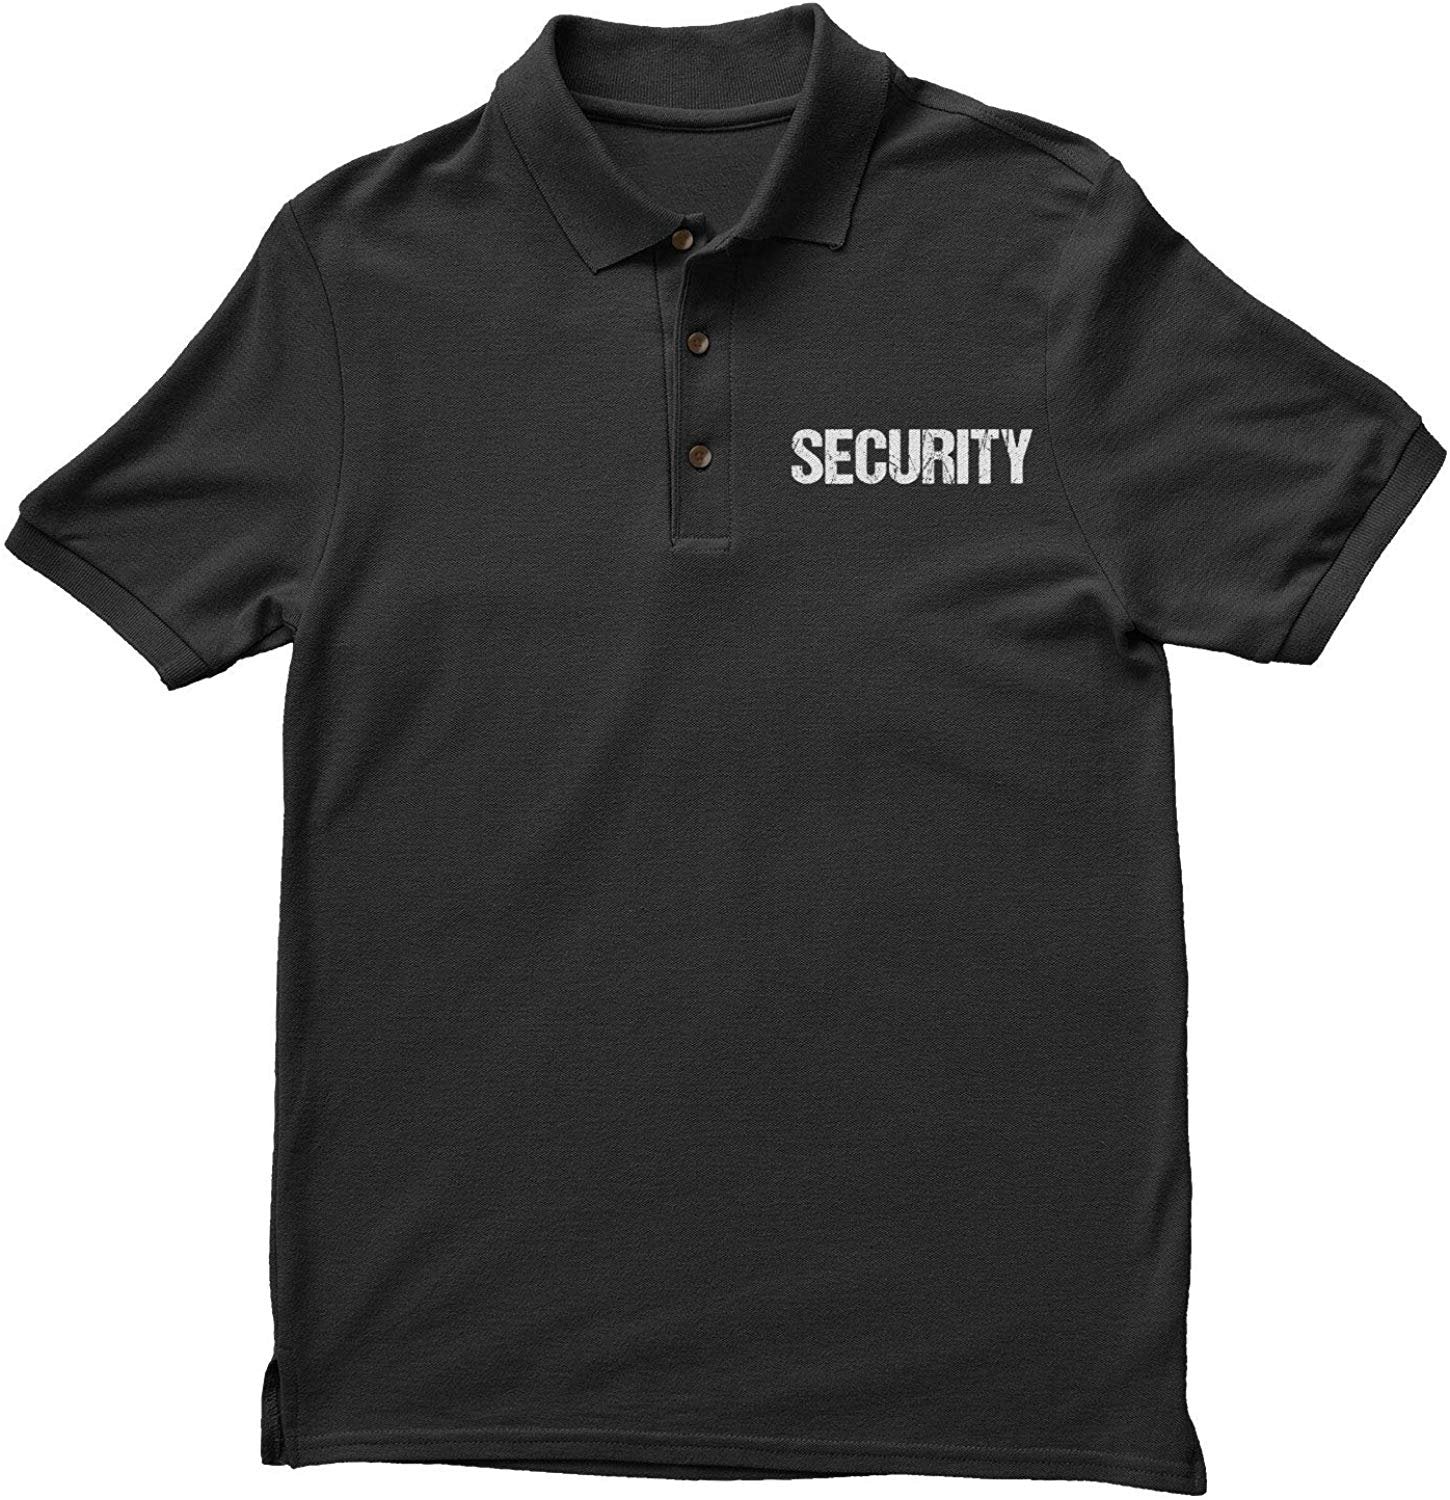 Security Polo Shirt Front & Back Print (Distressed, Black & White ...